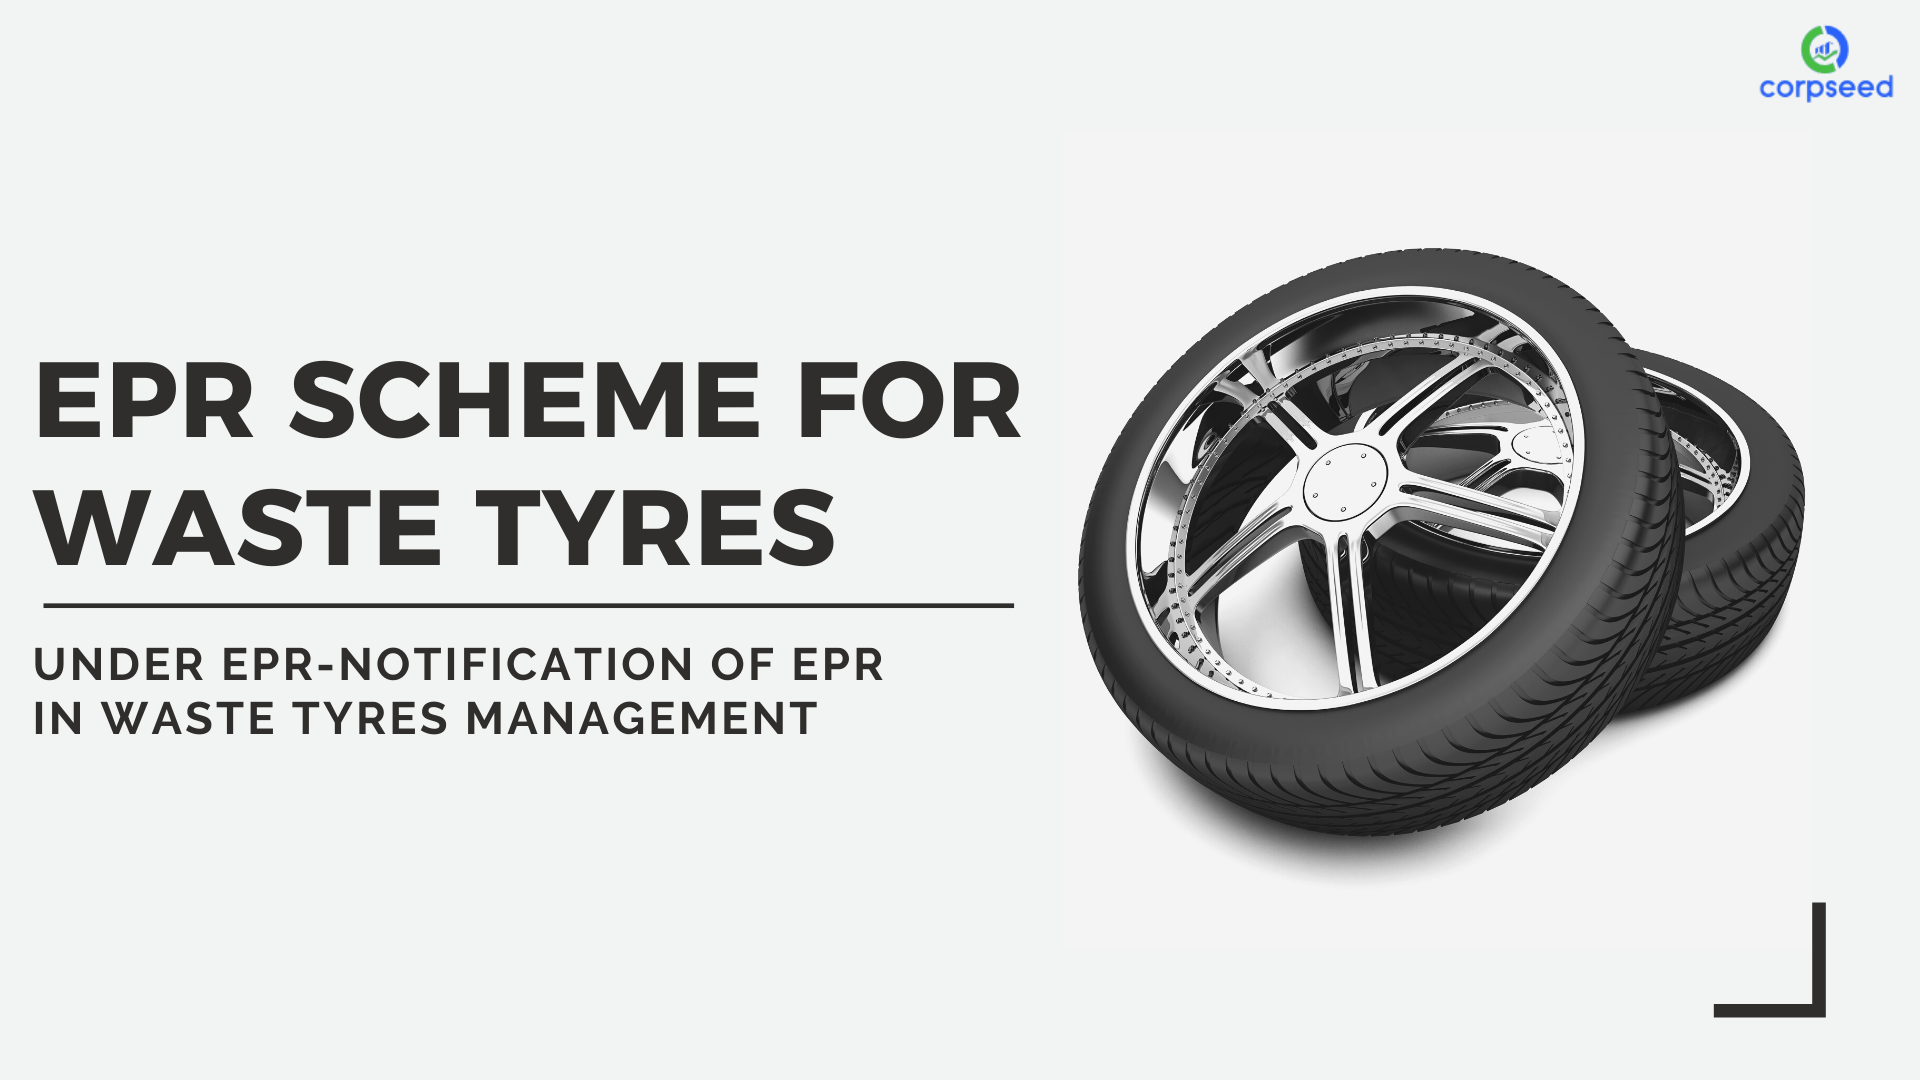 EPR_Scheme_For_Waste_Tyres_Under_EPR-Notification_of_EPR_in_Waste_Tyres_Management_corpseed.png